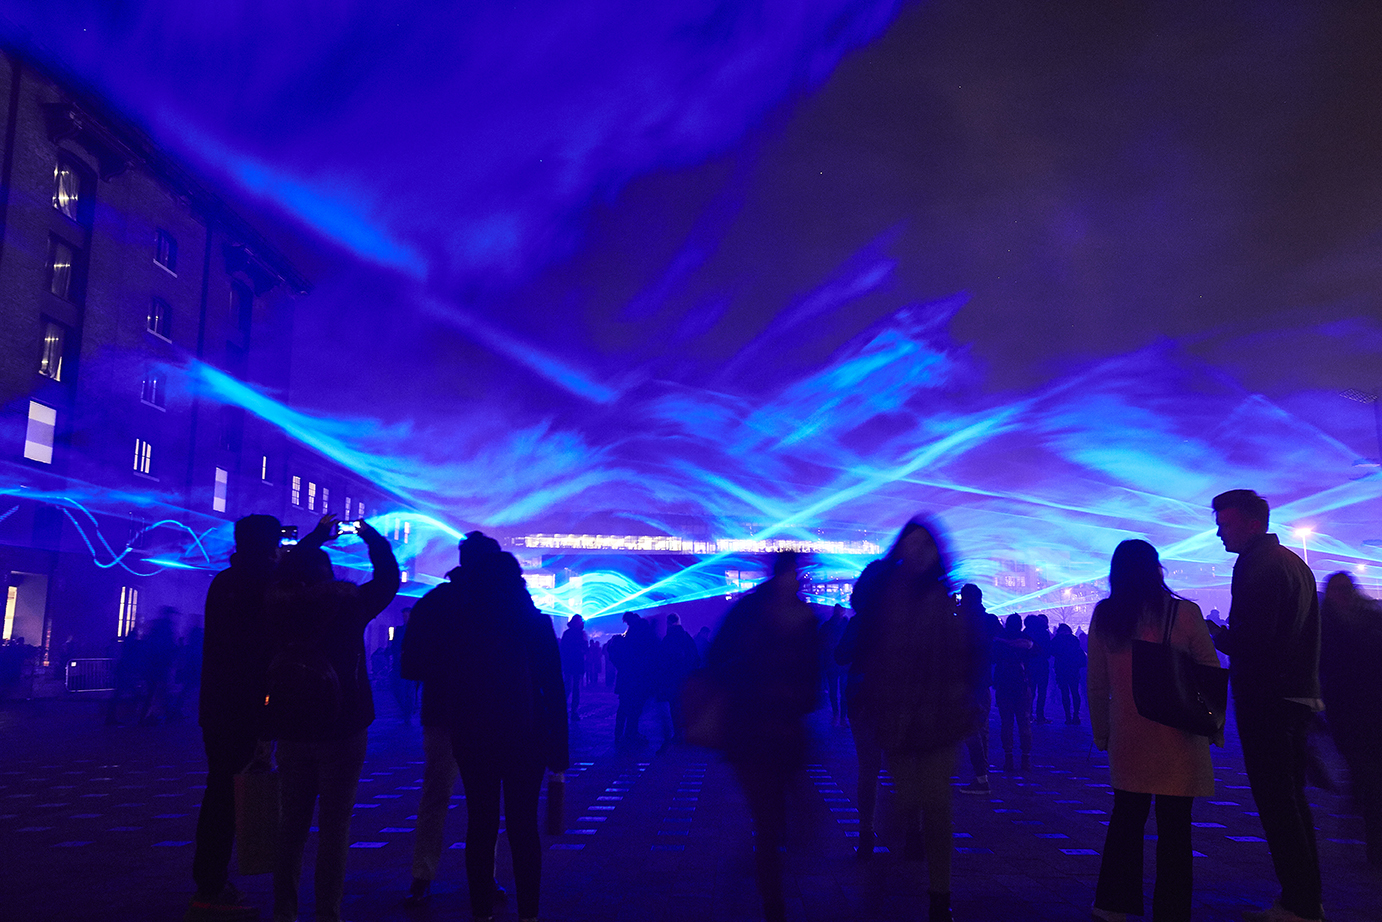 Waterlicht by Daan Roosegaarde, Granary Square, Kings Cross. Lumiere London 2018, 18 - 21 January, produced by Artichoke and commissioned by the Mayor of London. Photo by Matthew Andrews